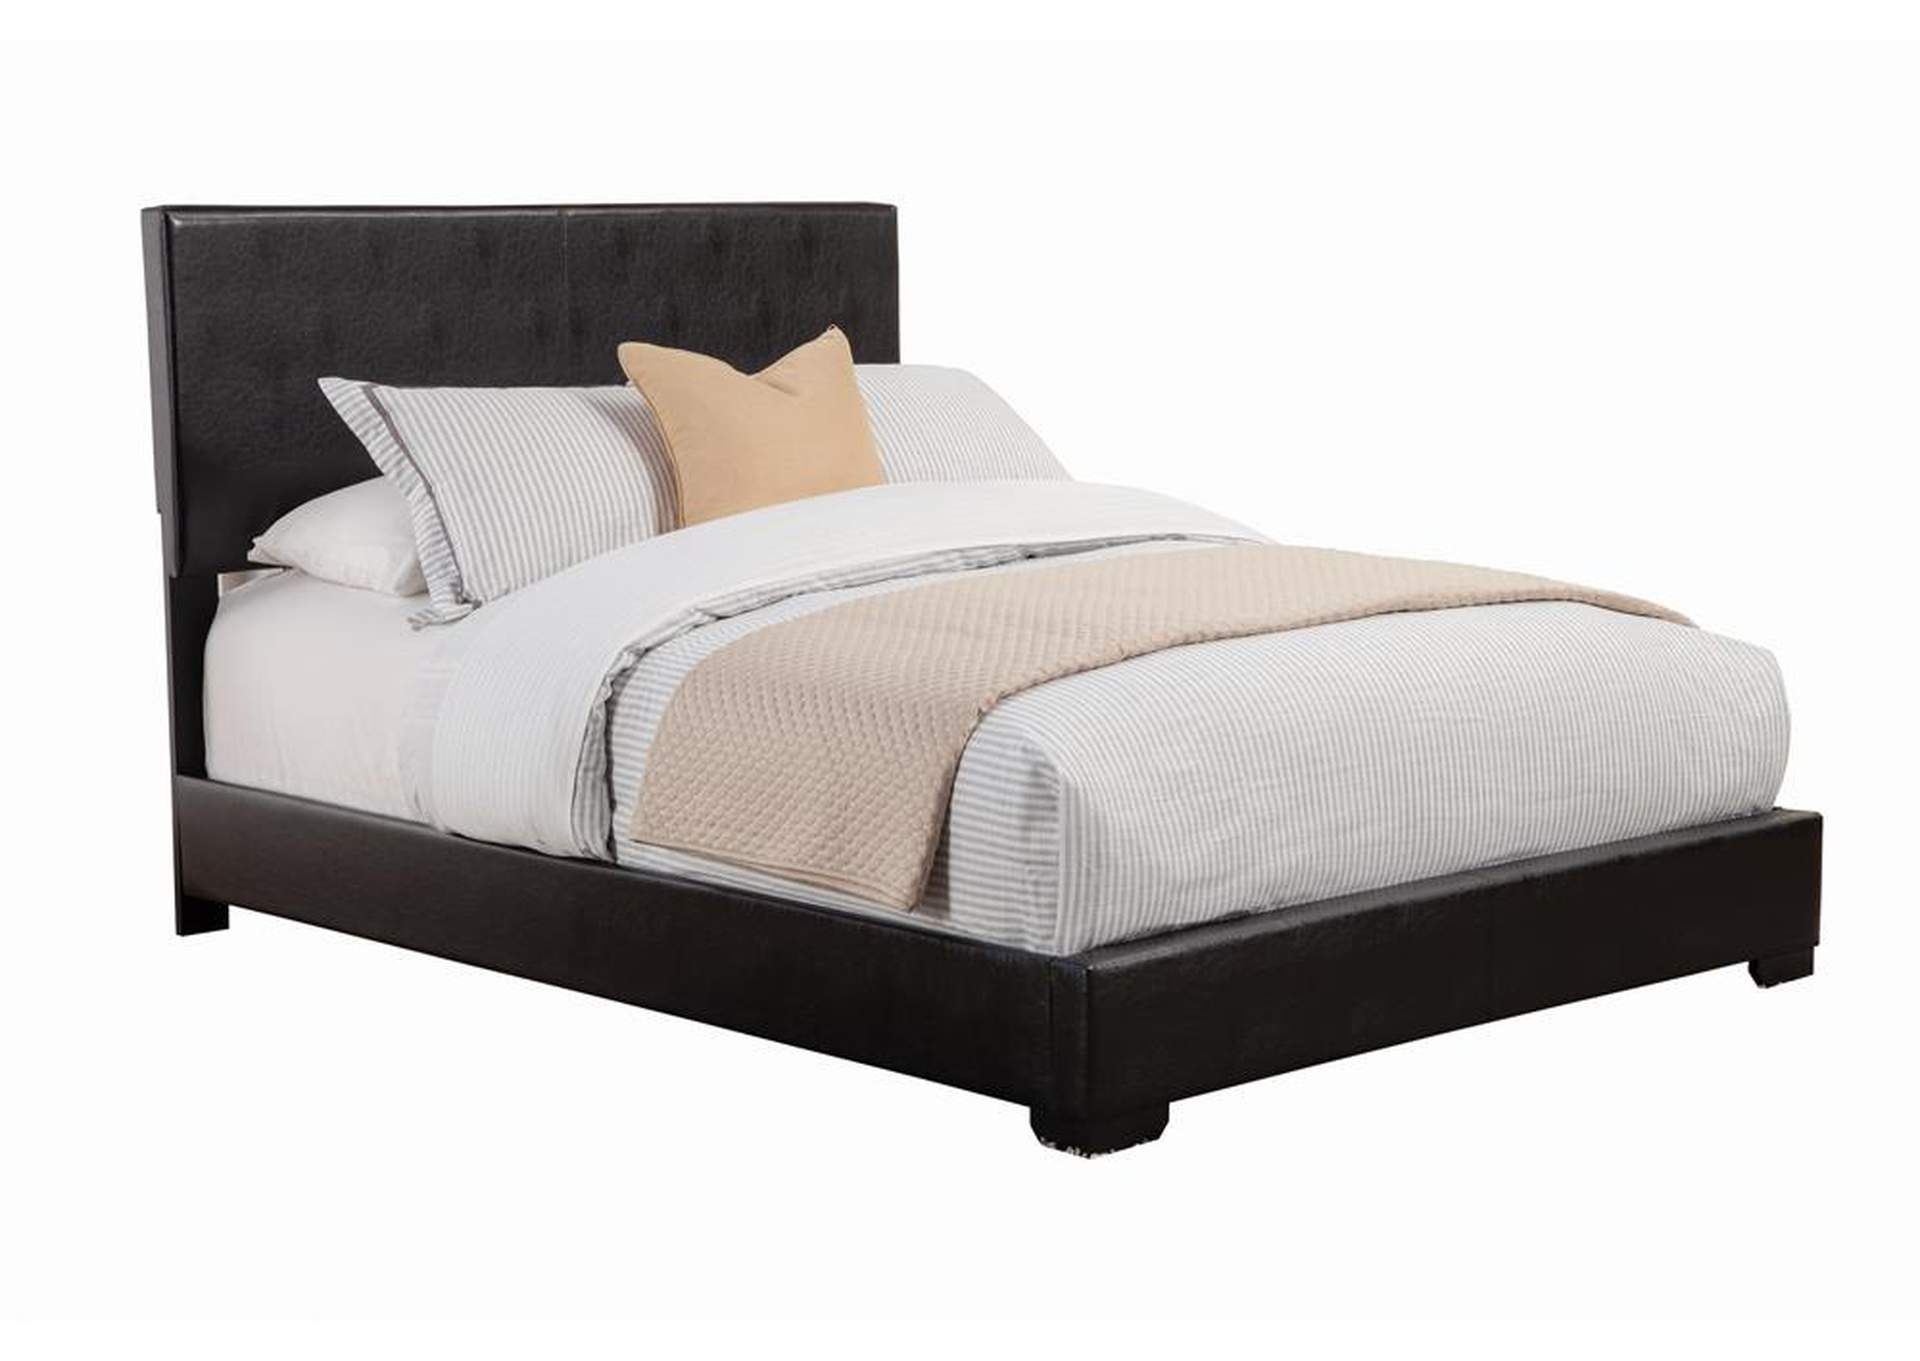 Conner Casual Black Upholstered Queen Bed,Coaster Furniture